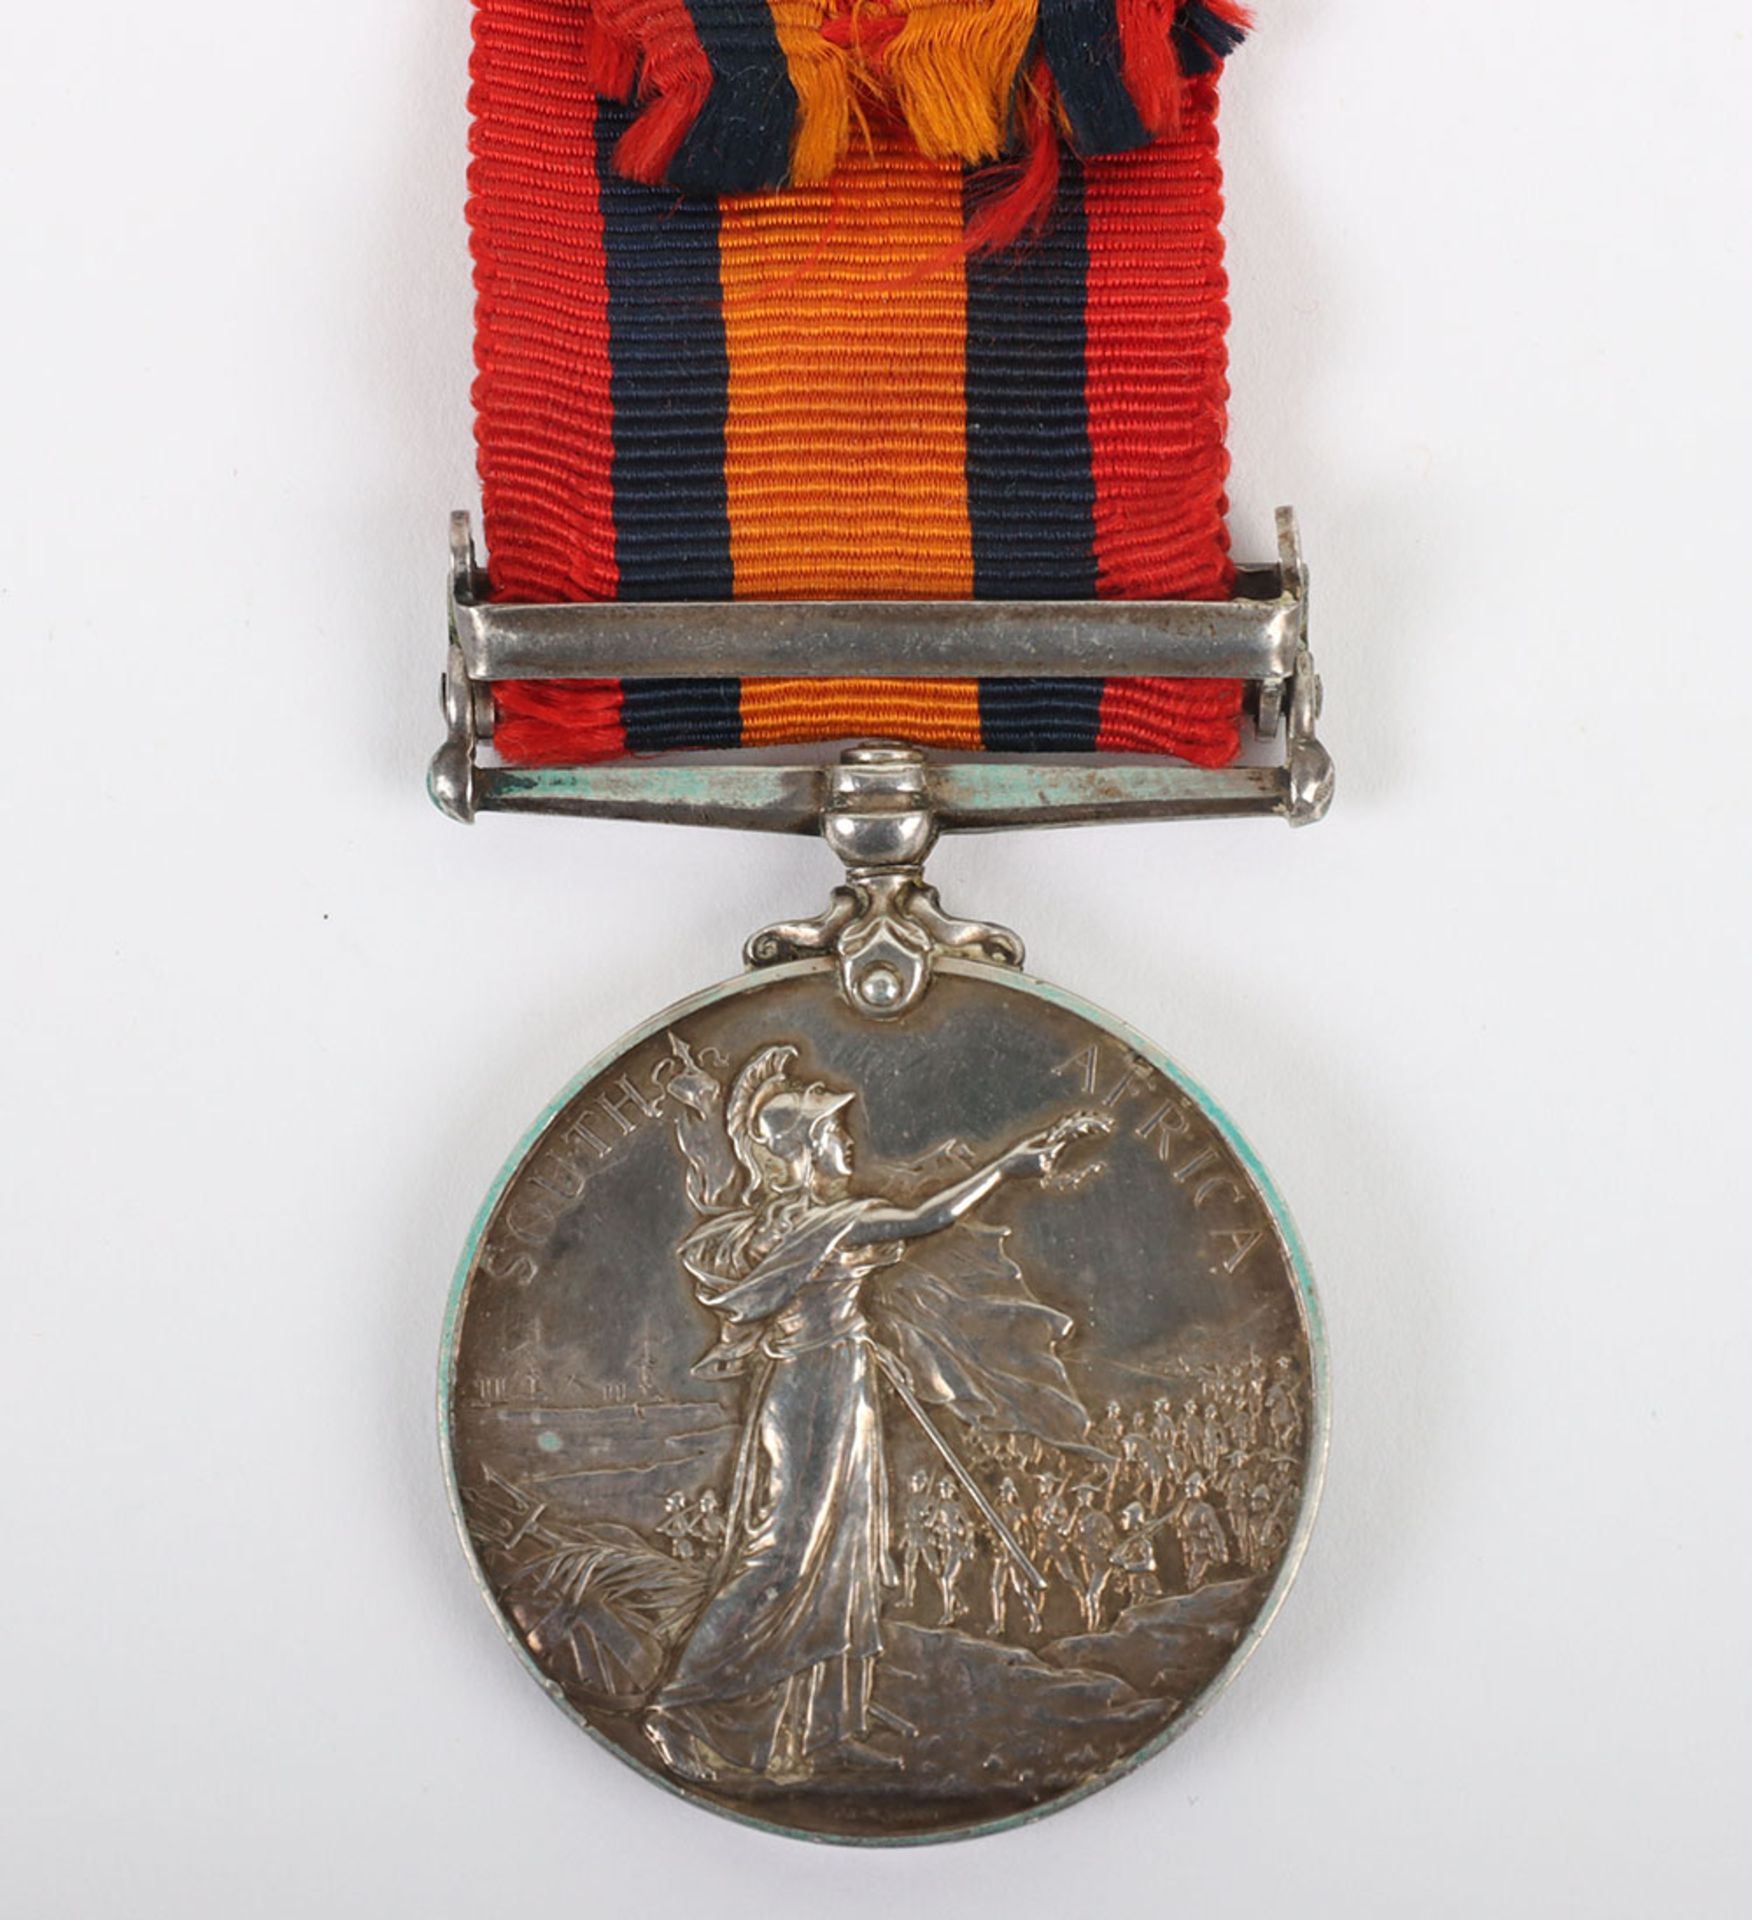 Queens South Africa Medal Royal Field Artillery - Image 6 of 6